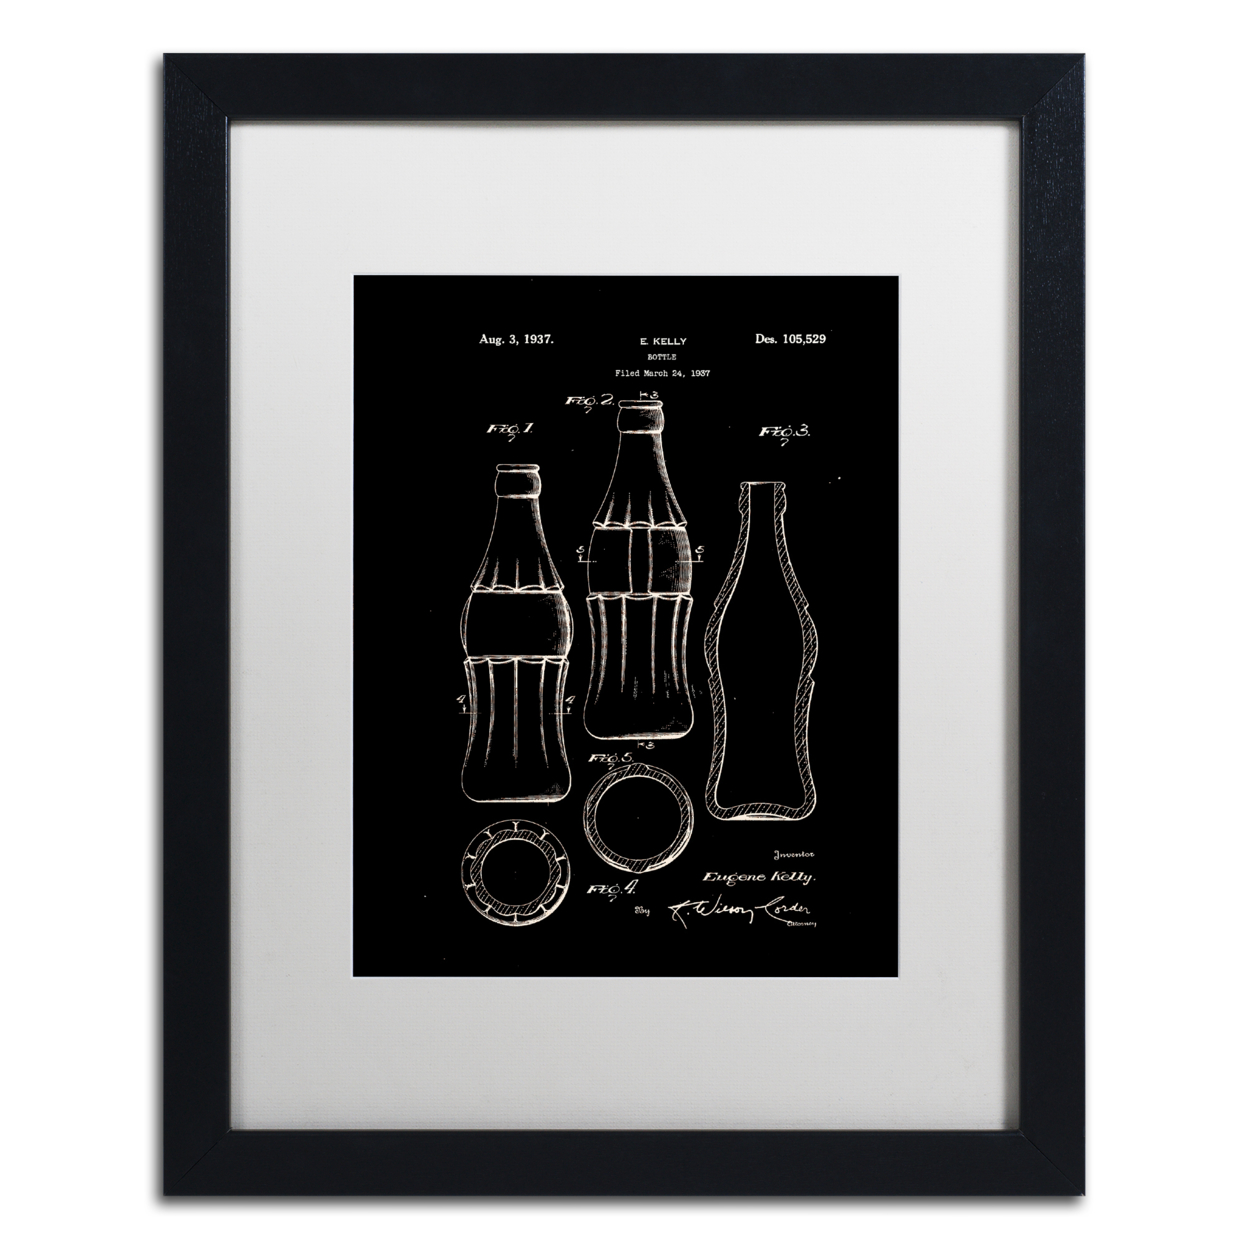 Claire Doherty 'Coca Cola Bottle Patent 1937 Black' Black Wooden Framed Art 18 X 22 Inches